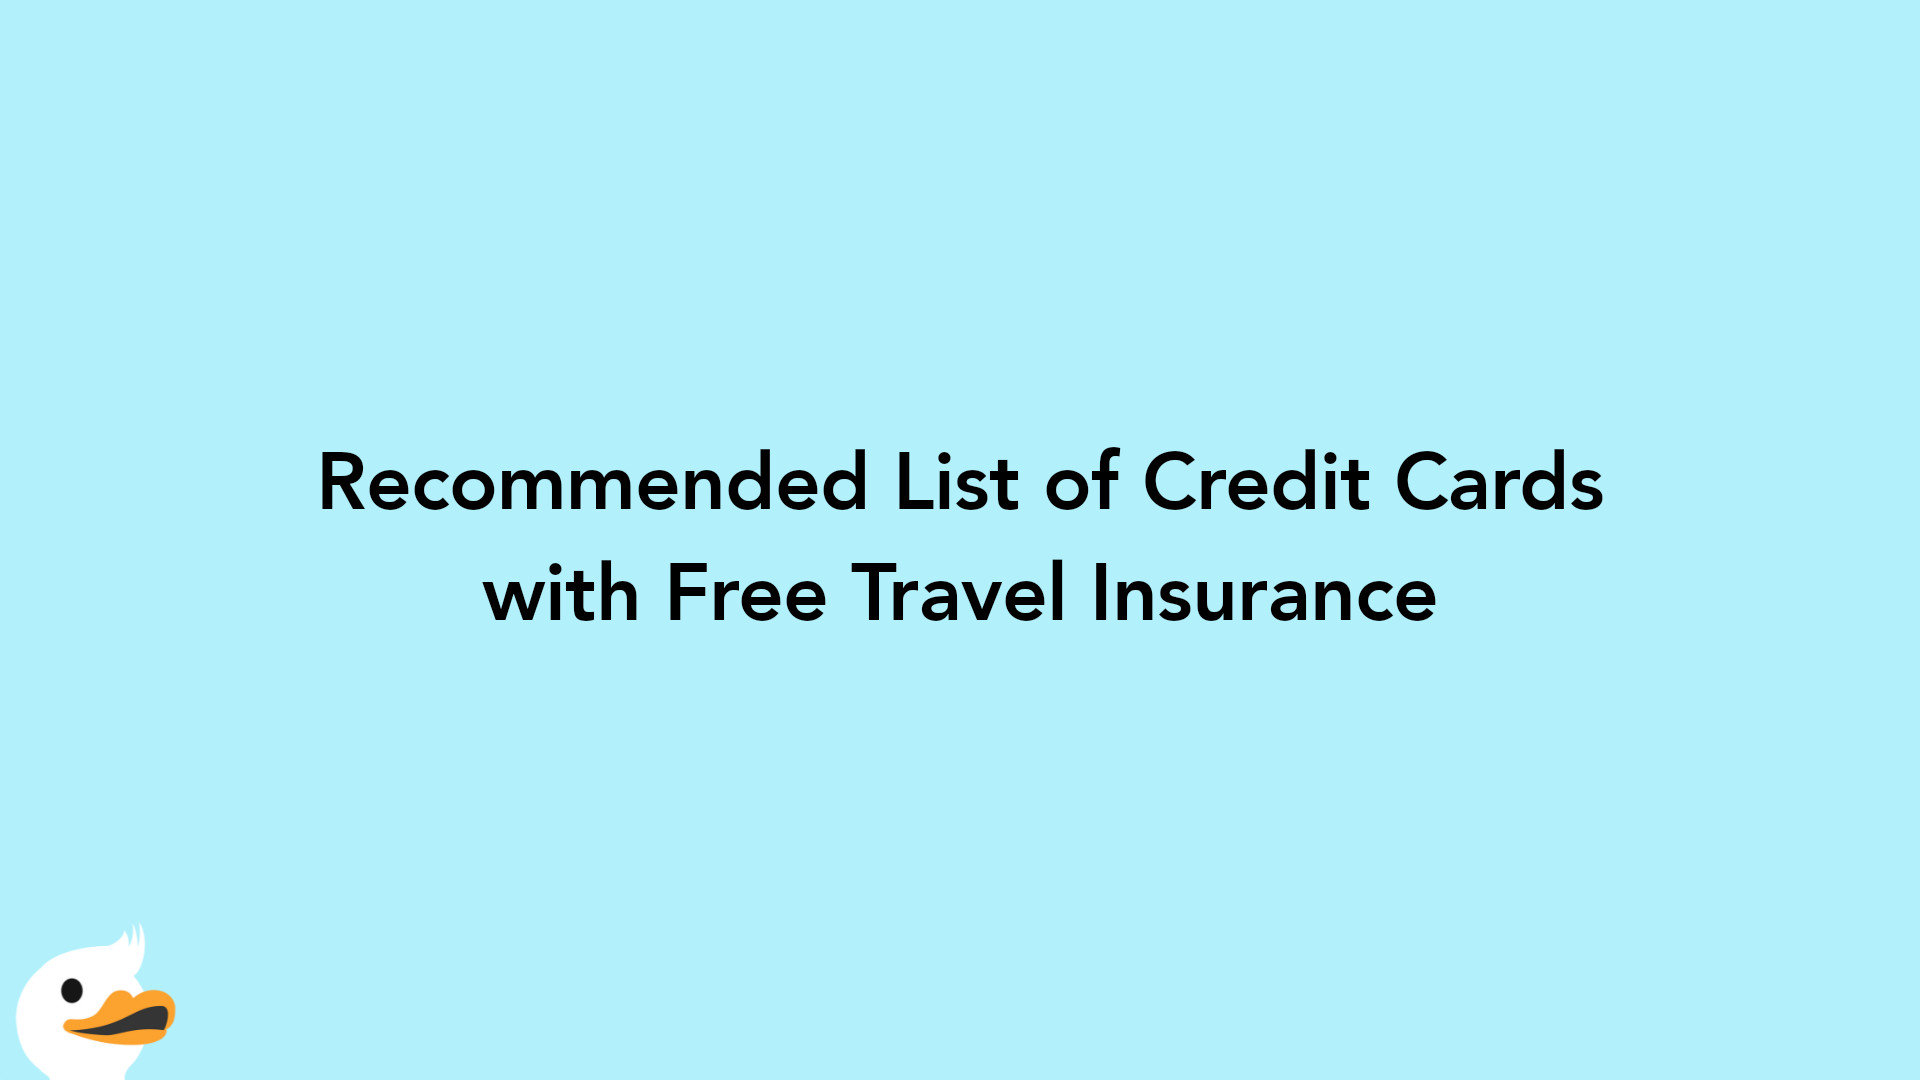 Recommended List of Credit Cards with Free Travel Insurance